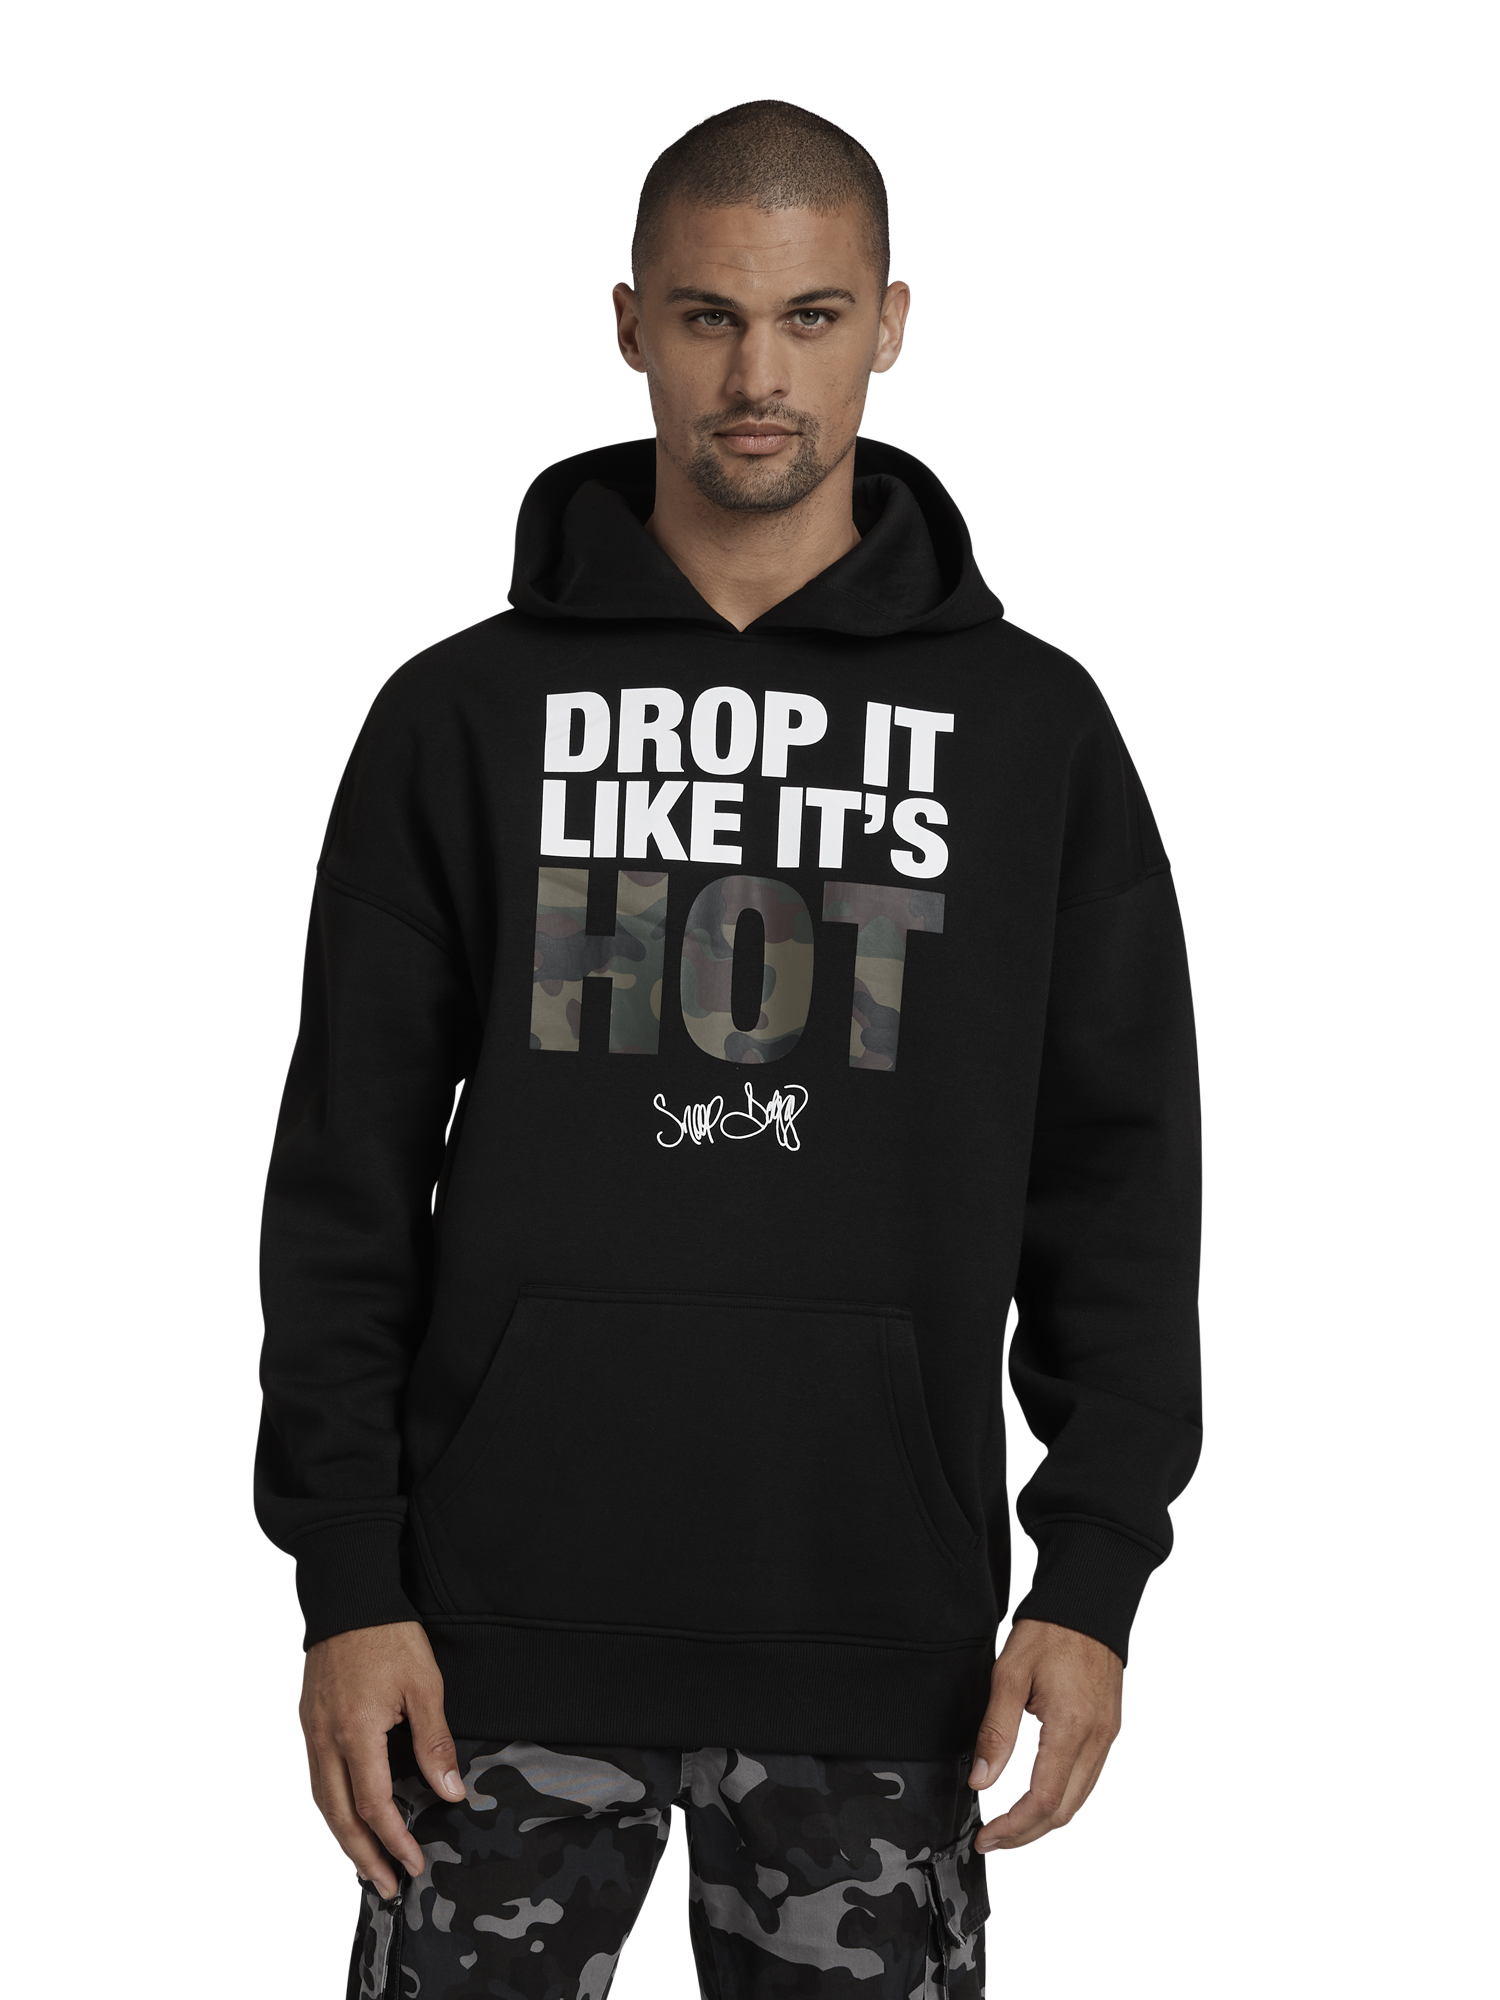 Dogg Supply by Snoop Dogg Men's Graphic Hoodie, Sizes XS-3XL - Walmart.com